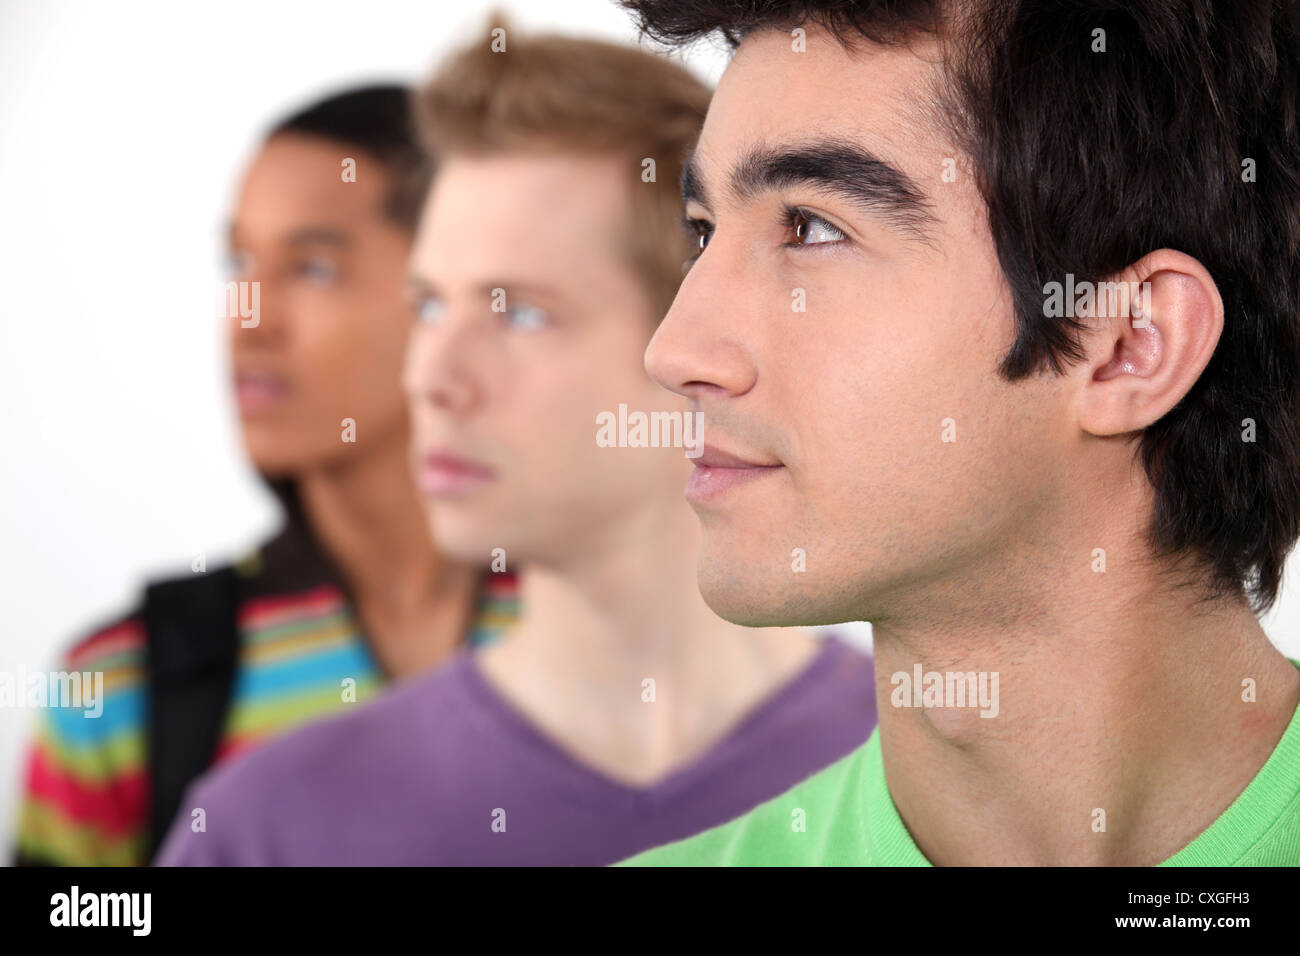 Young people with their eyes fixed on an object Stock Photo